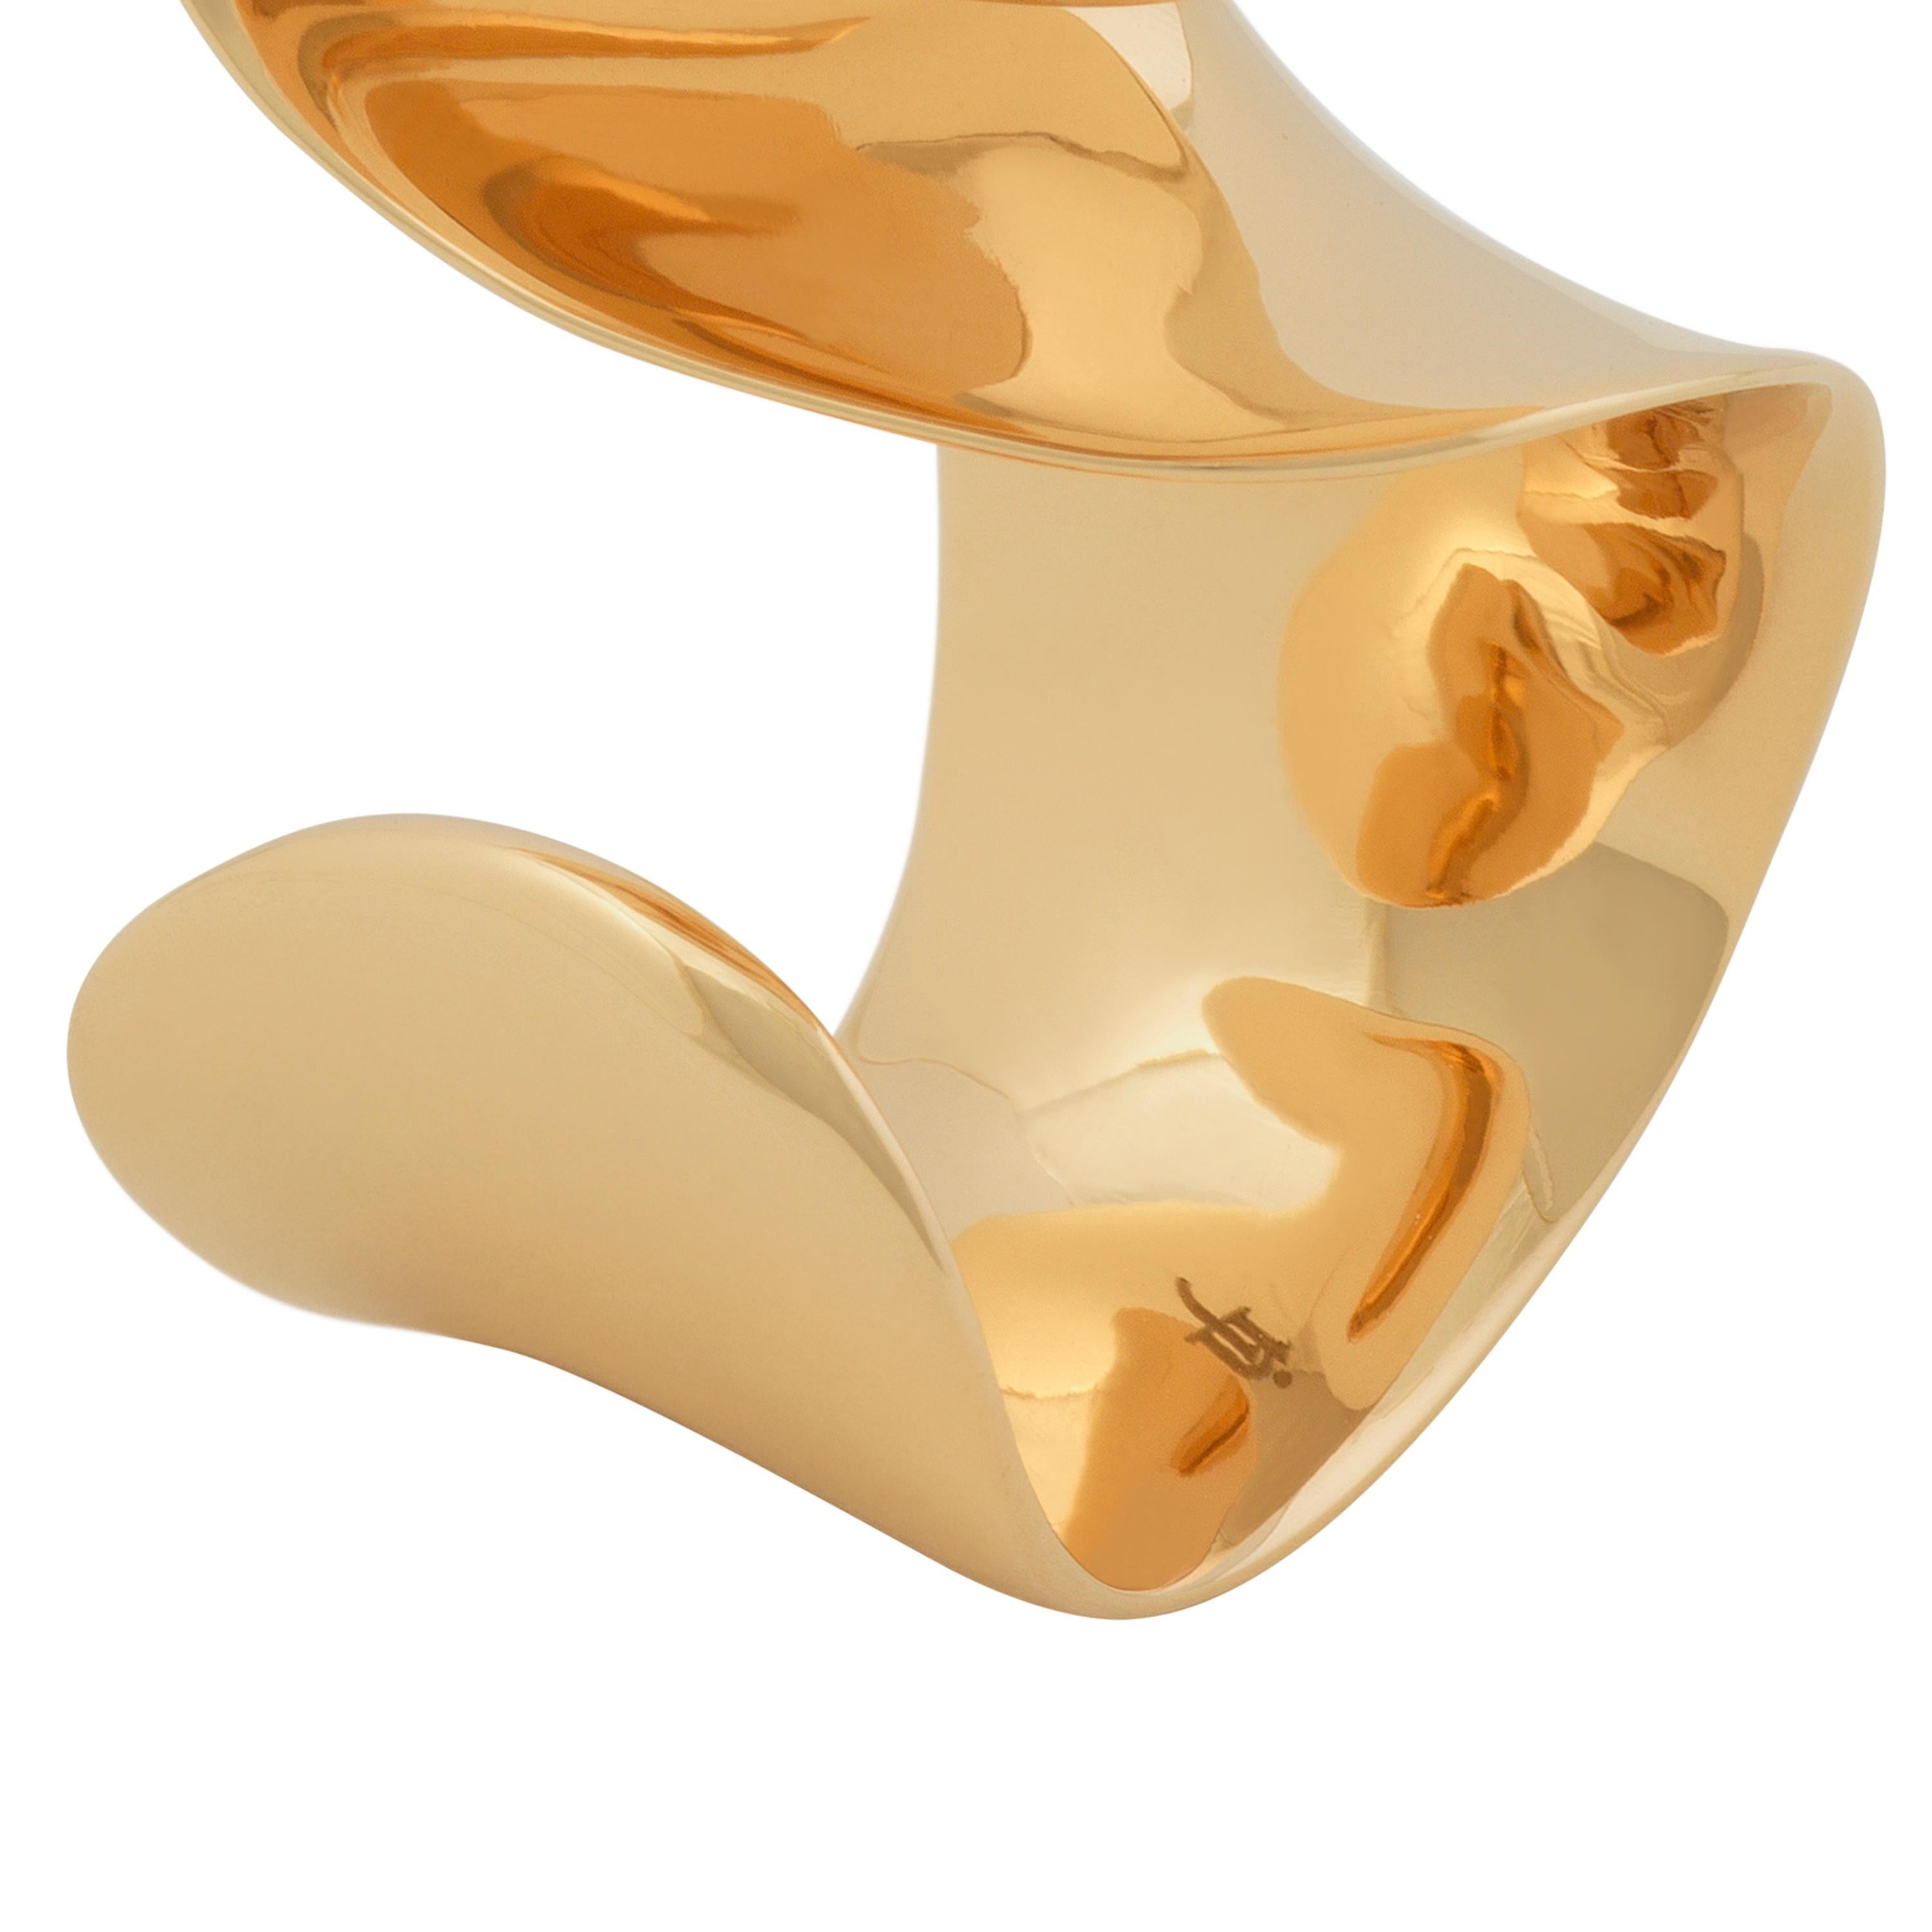 Nathalie Jean Contemporary Limited Edition 18 Karat Gold Sculpture Cocktail Ring 2